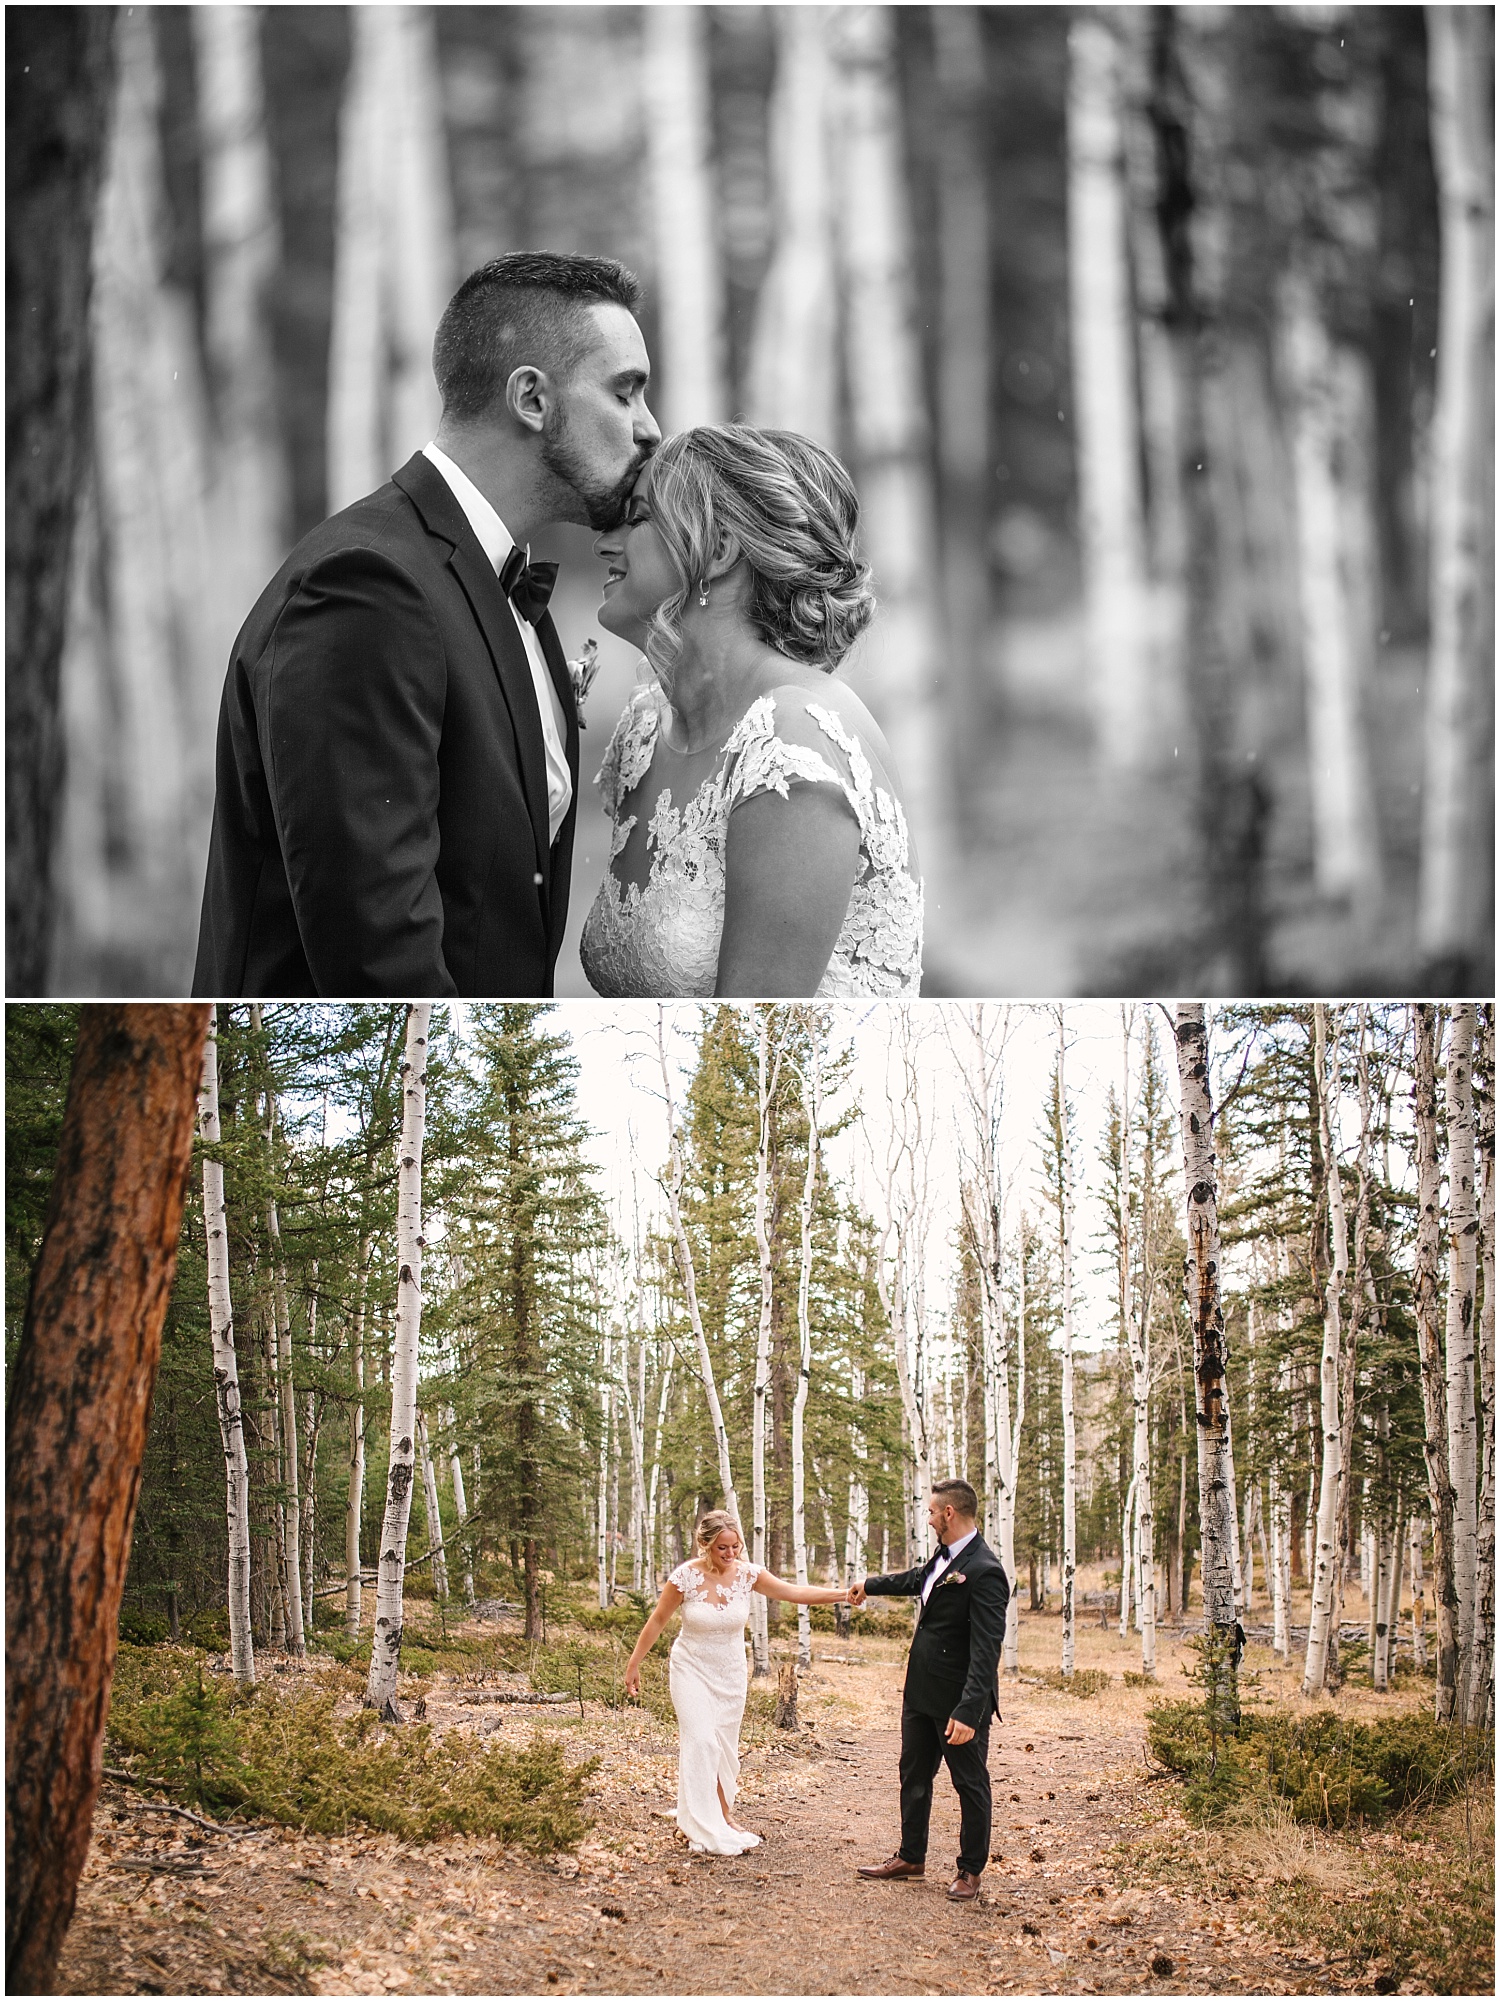 Bride and groom dancing among aspen trees for Woodland Park intimate wedding